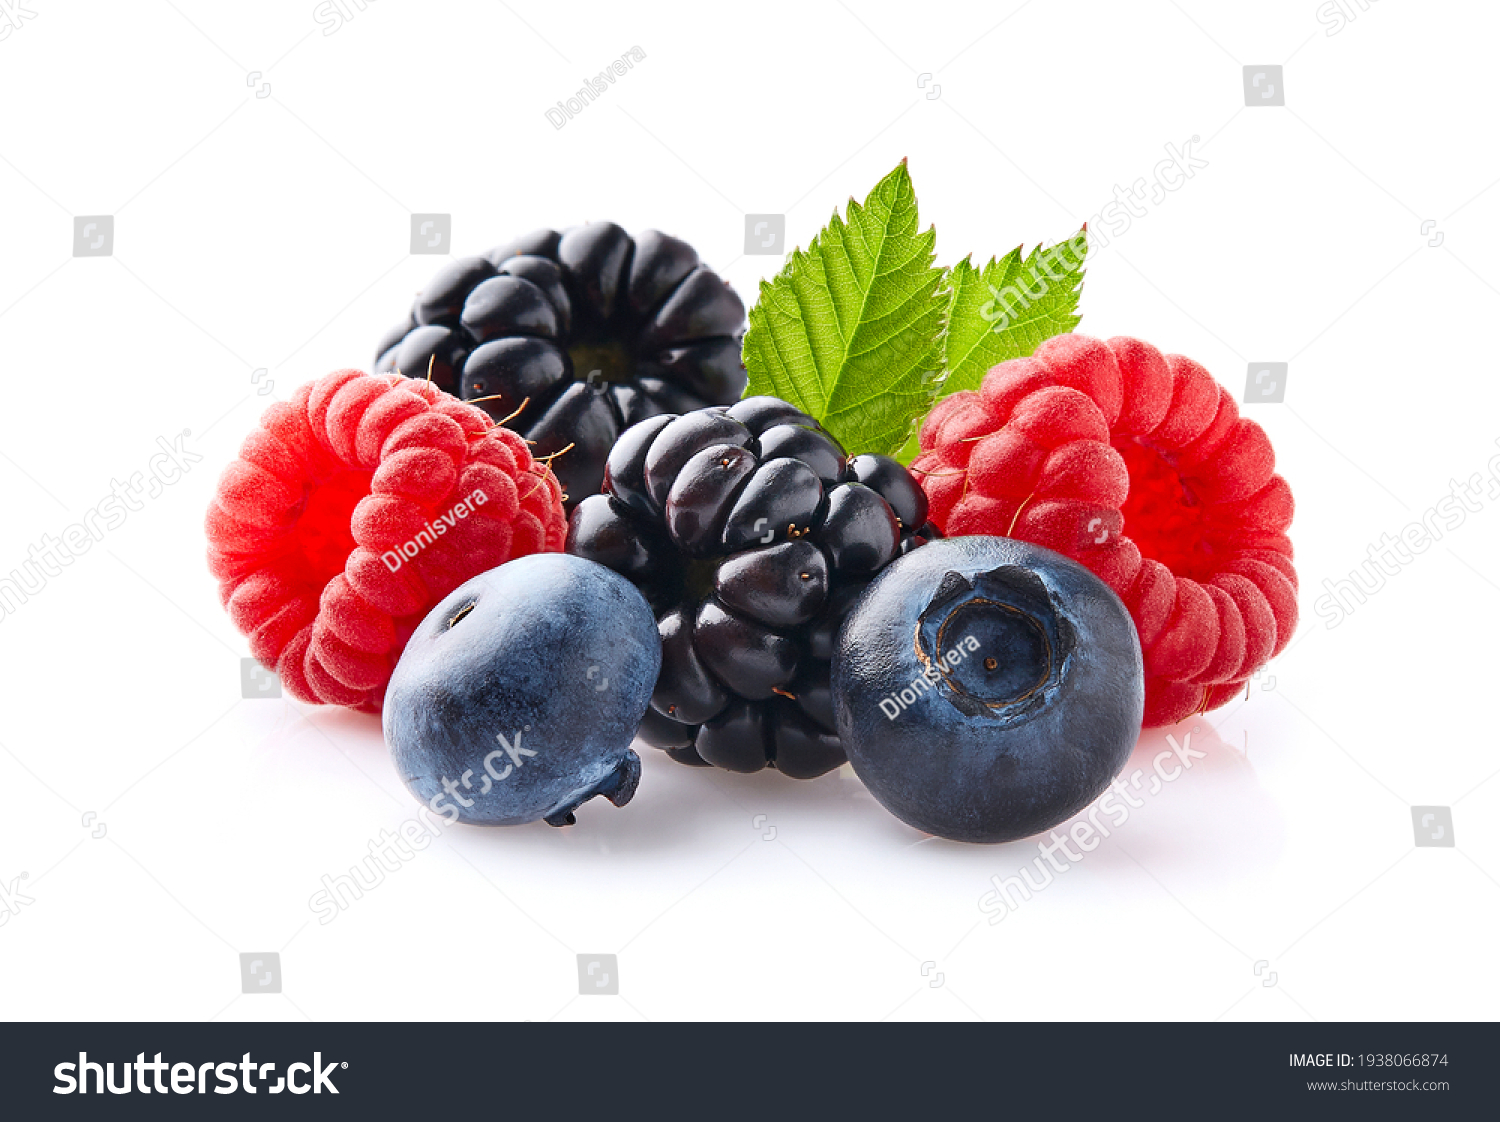 Berries with leaves on white background #1938066874